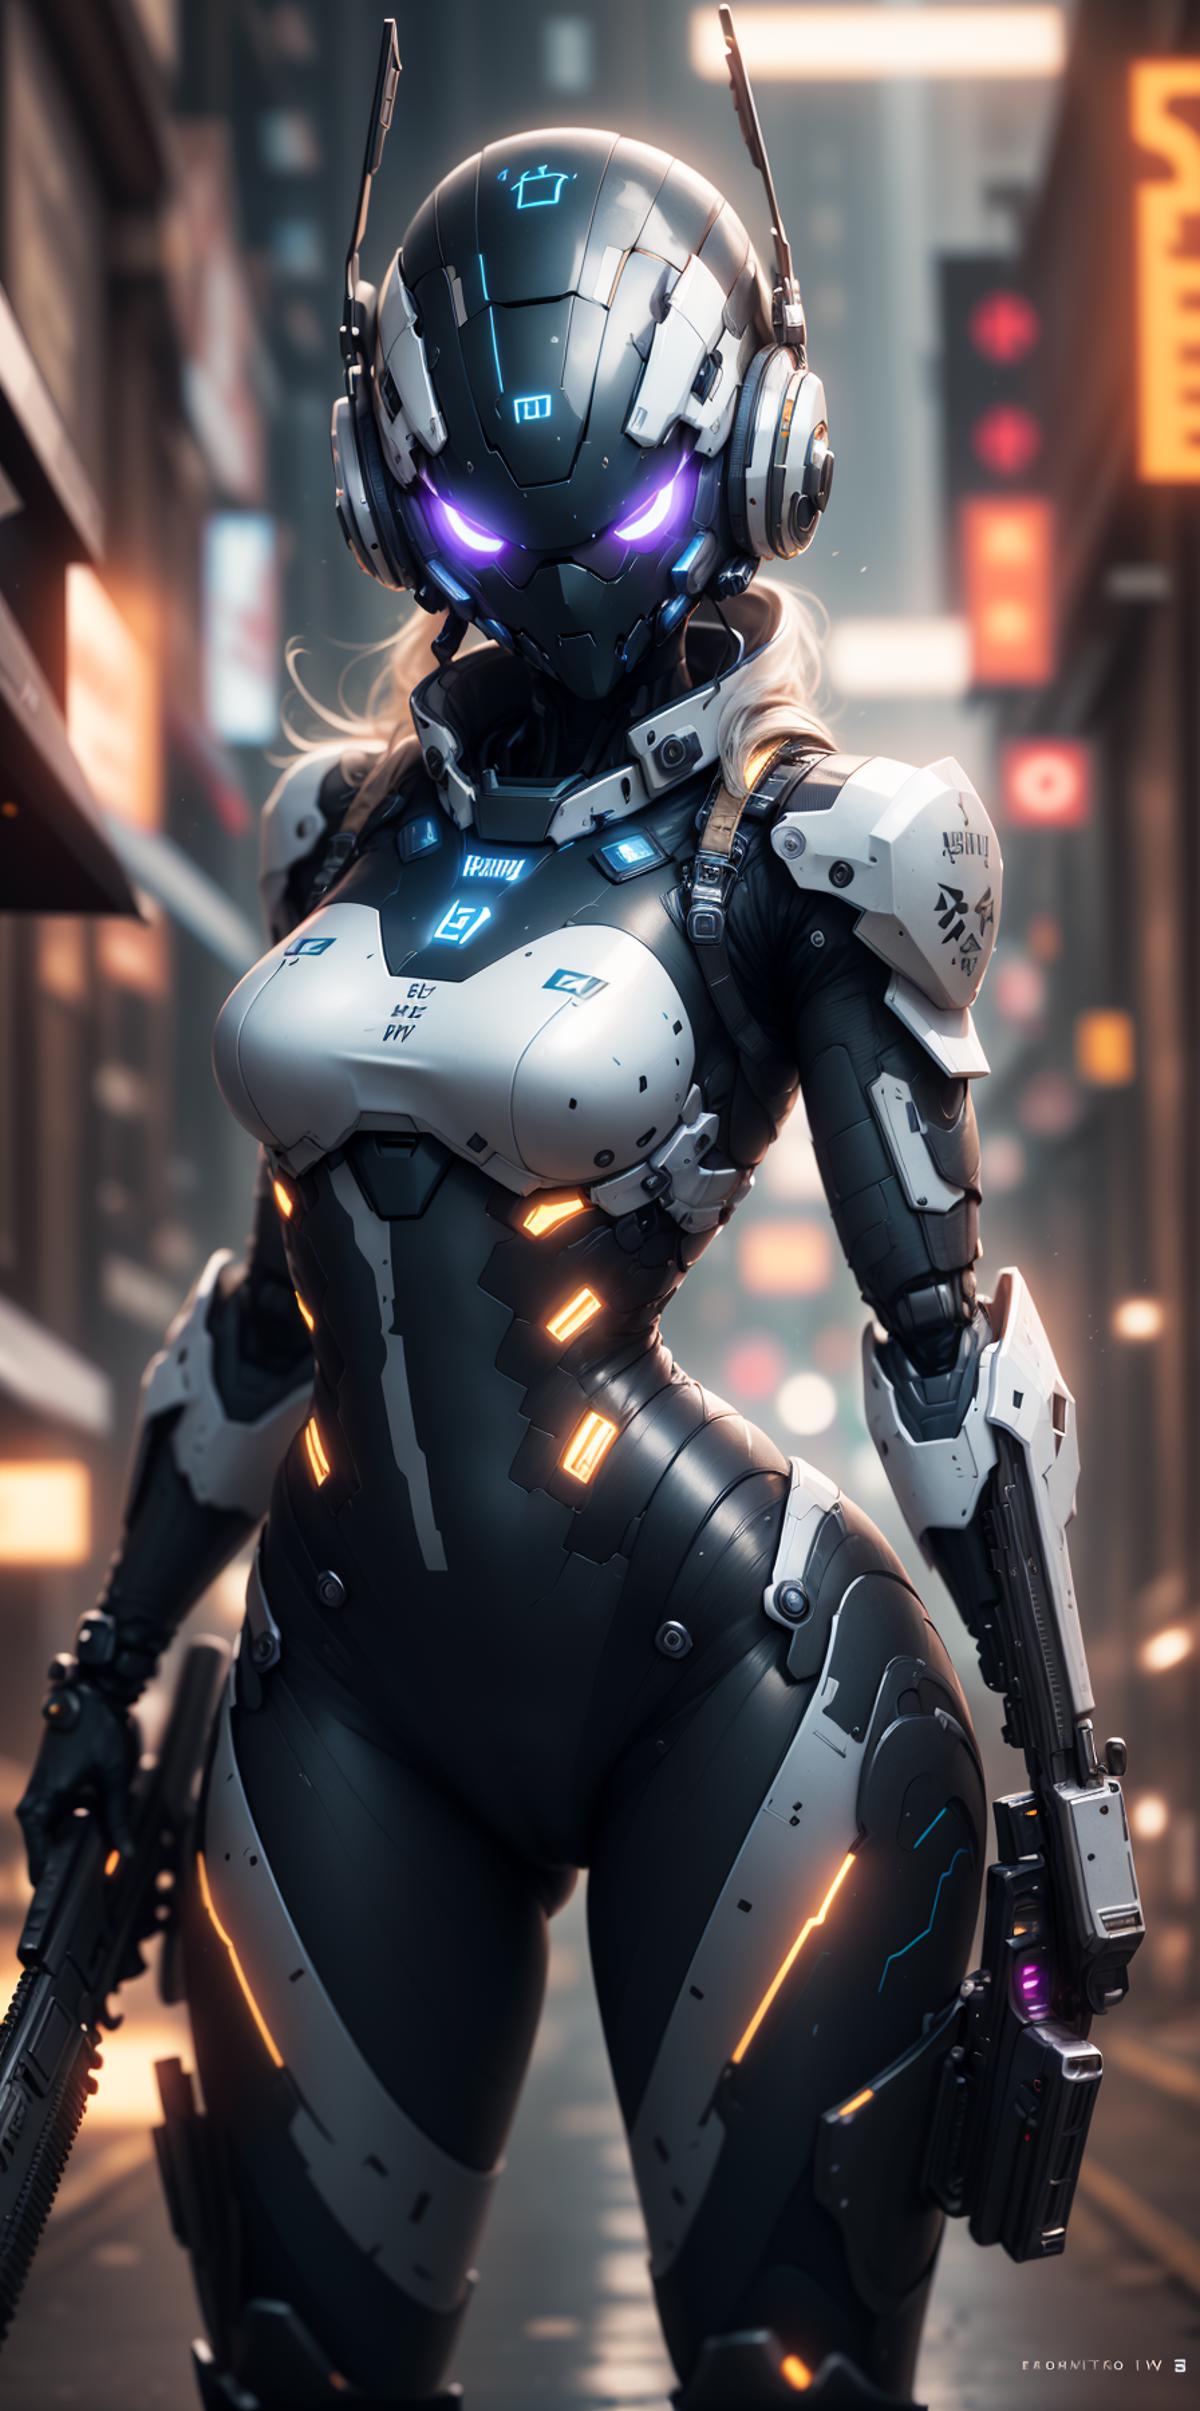 A futuristic female cyborg in black and white suit with a gun.